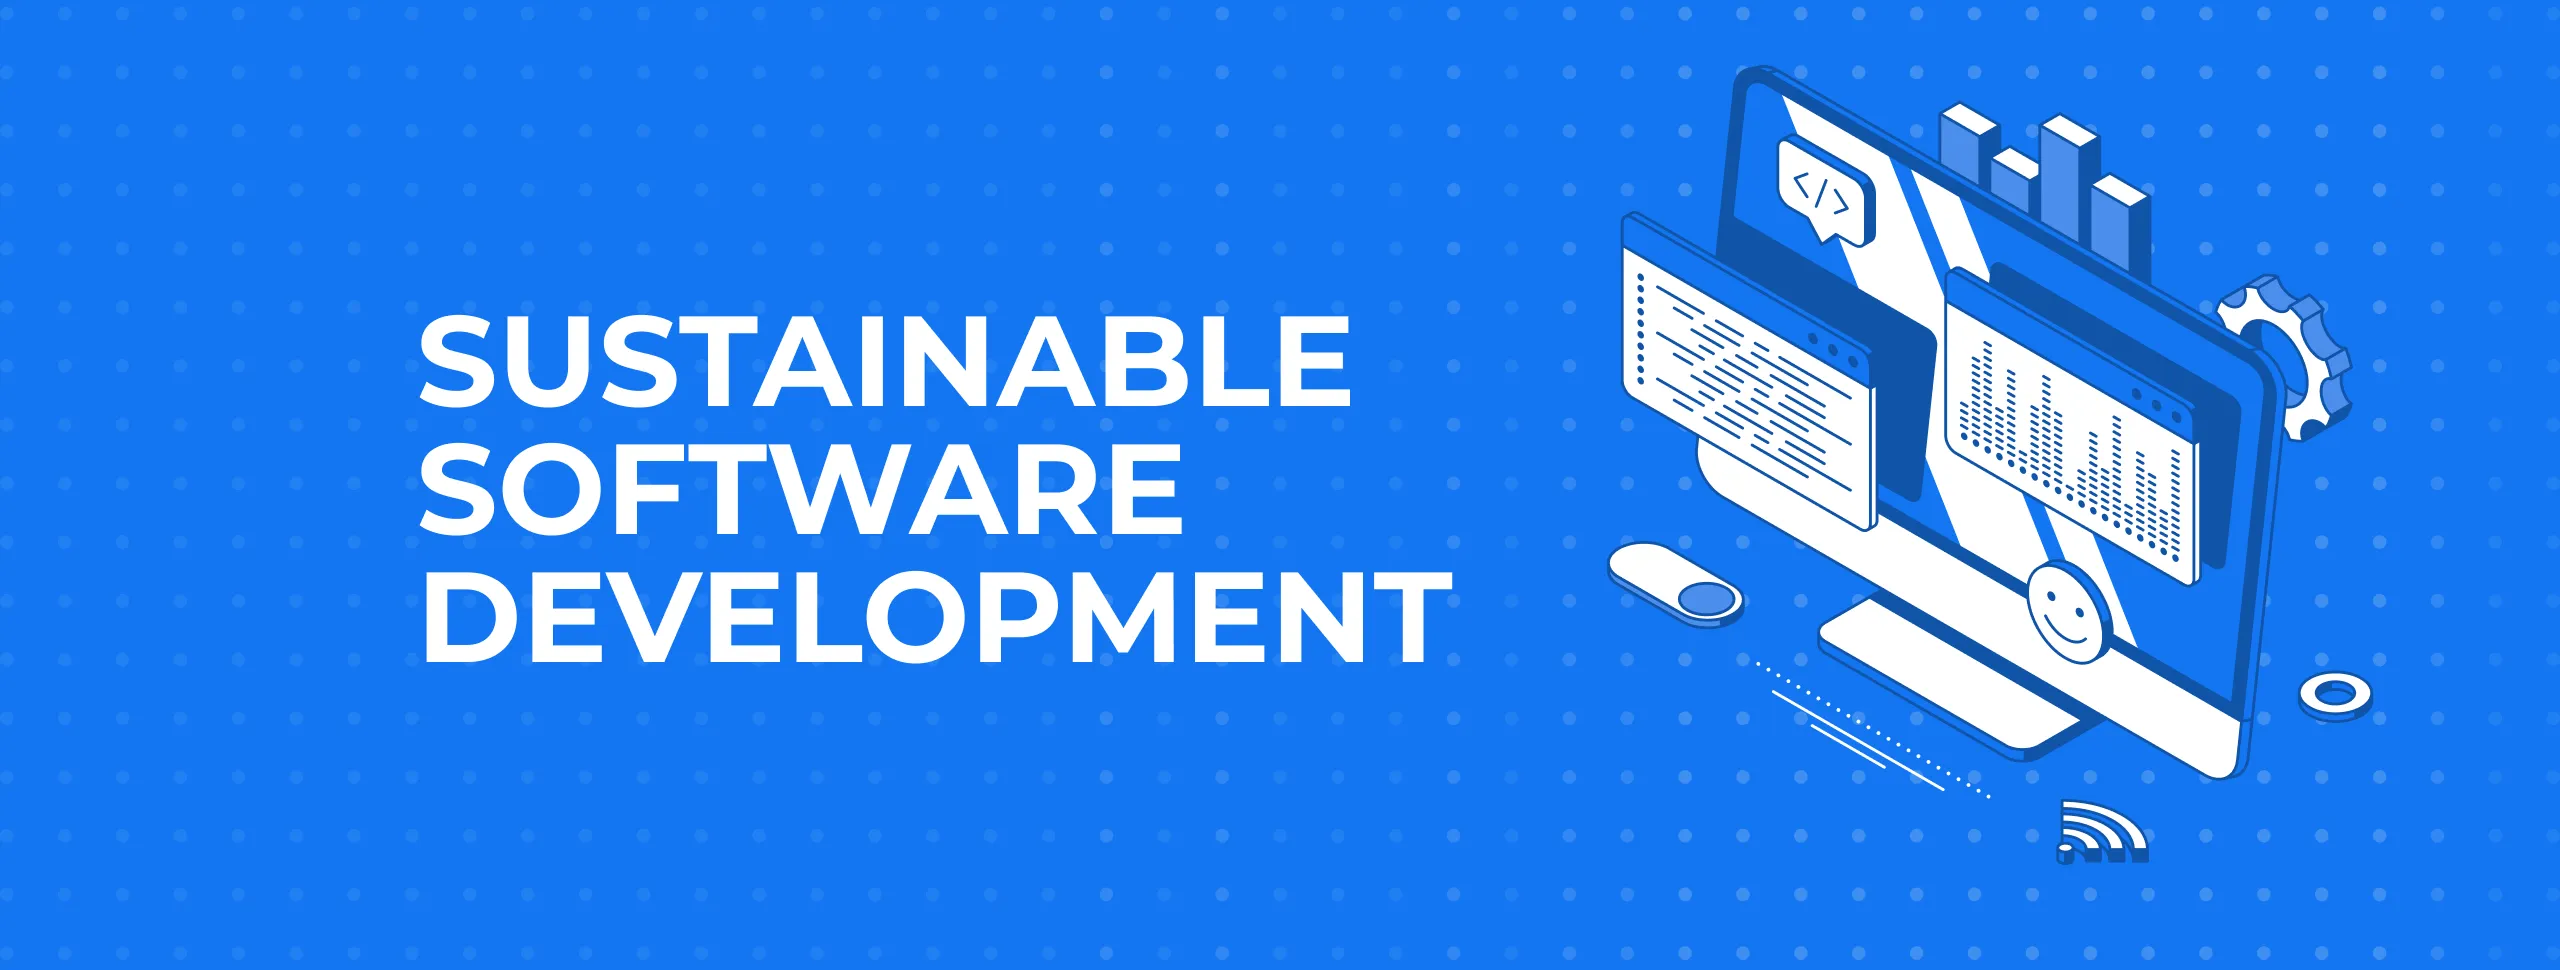 Sustainable Software Development: What Is It?